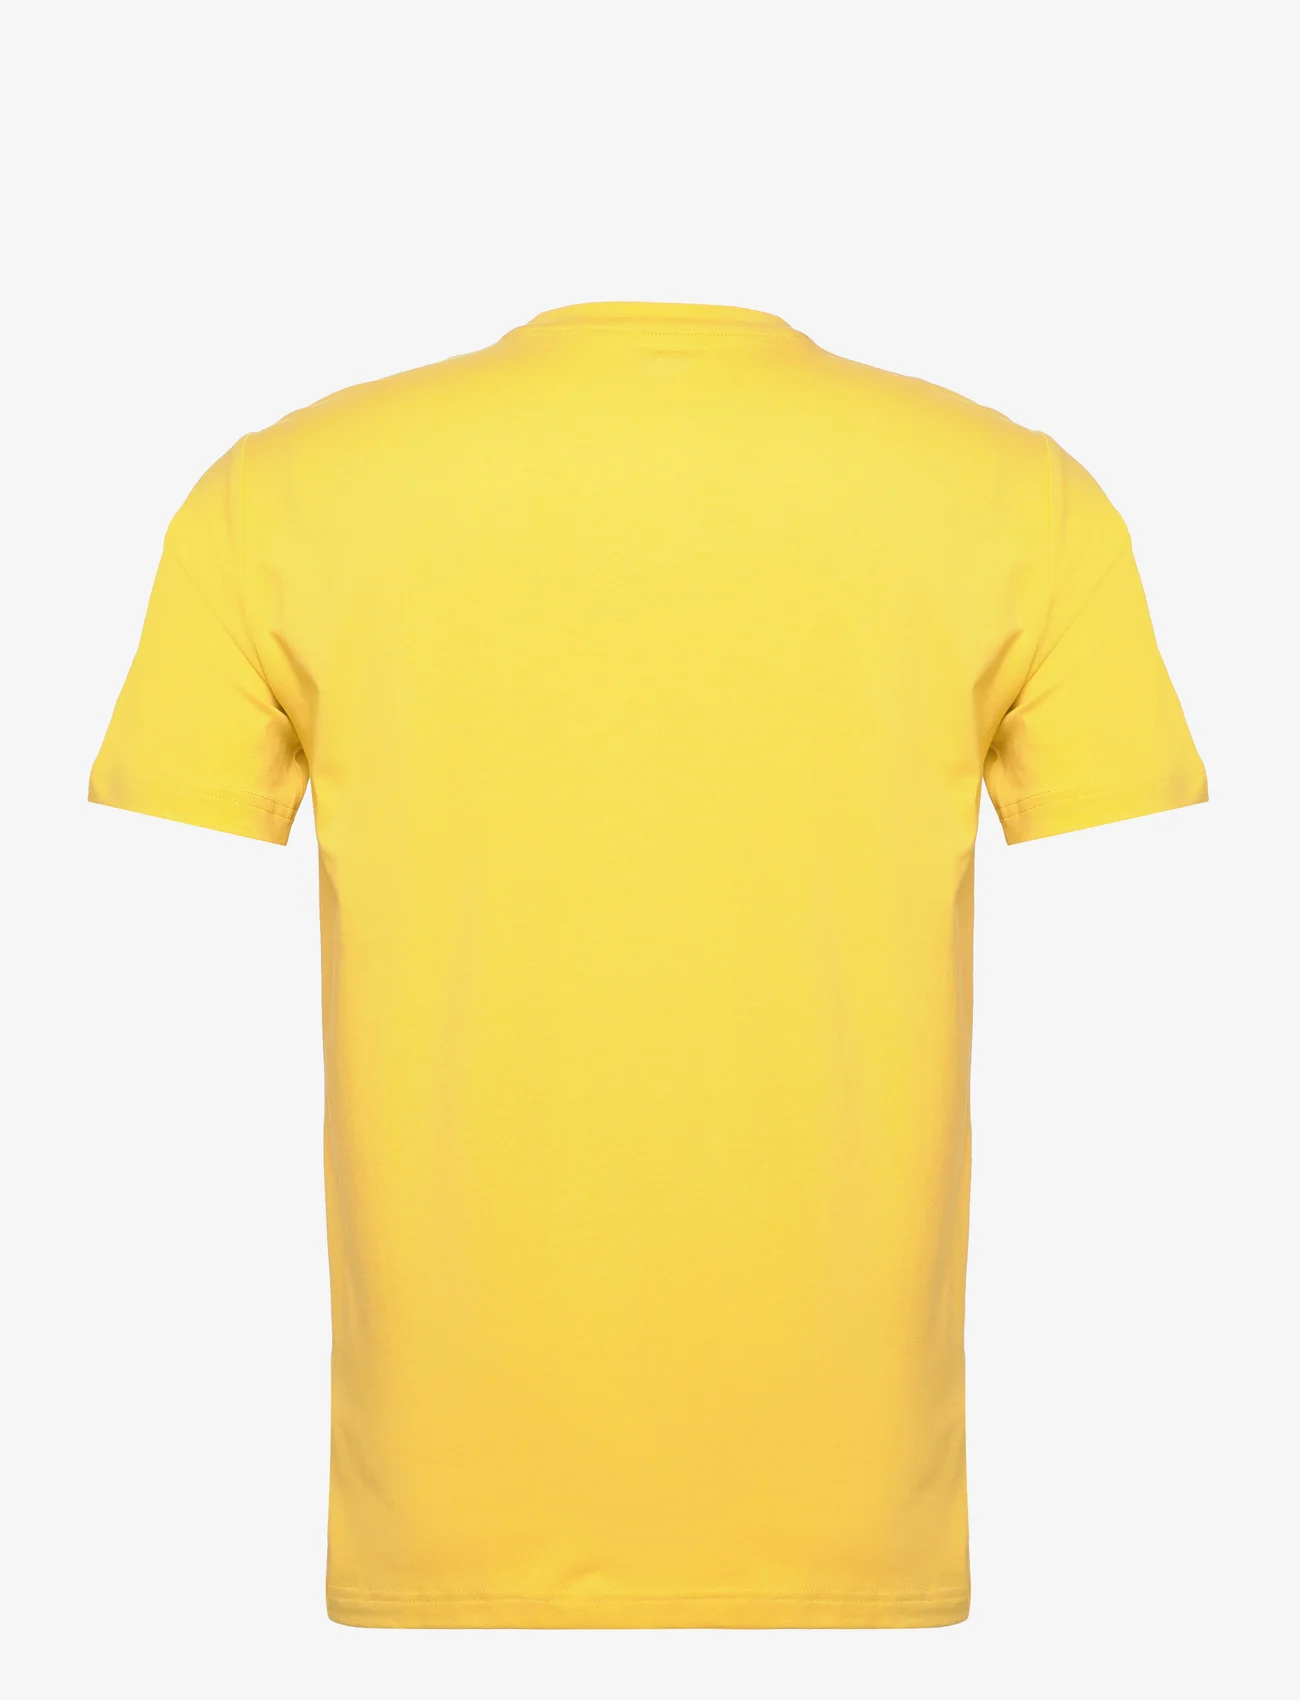 EA7 - TOPS - t-shirts - 1648-spicy mustard - 1